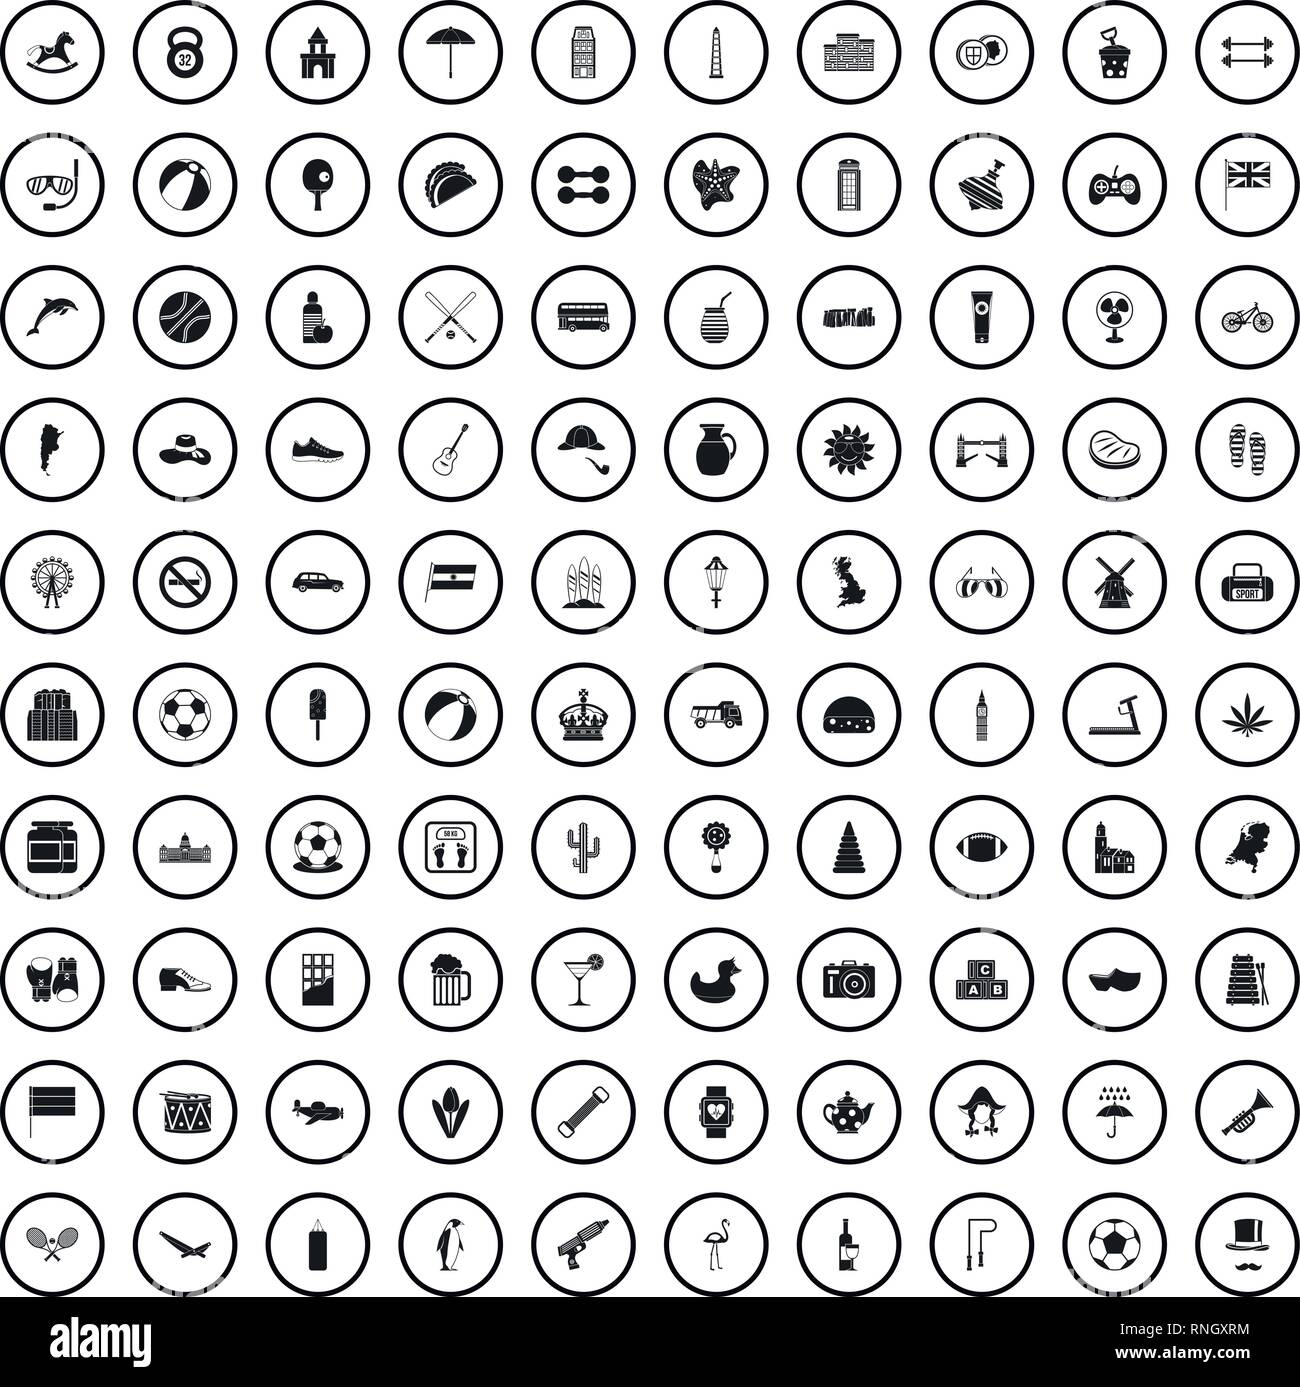 100 ball icons set, simple style  Stock Vector